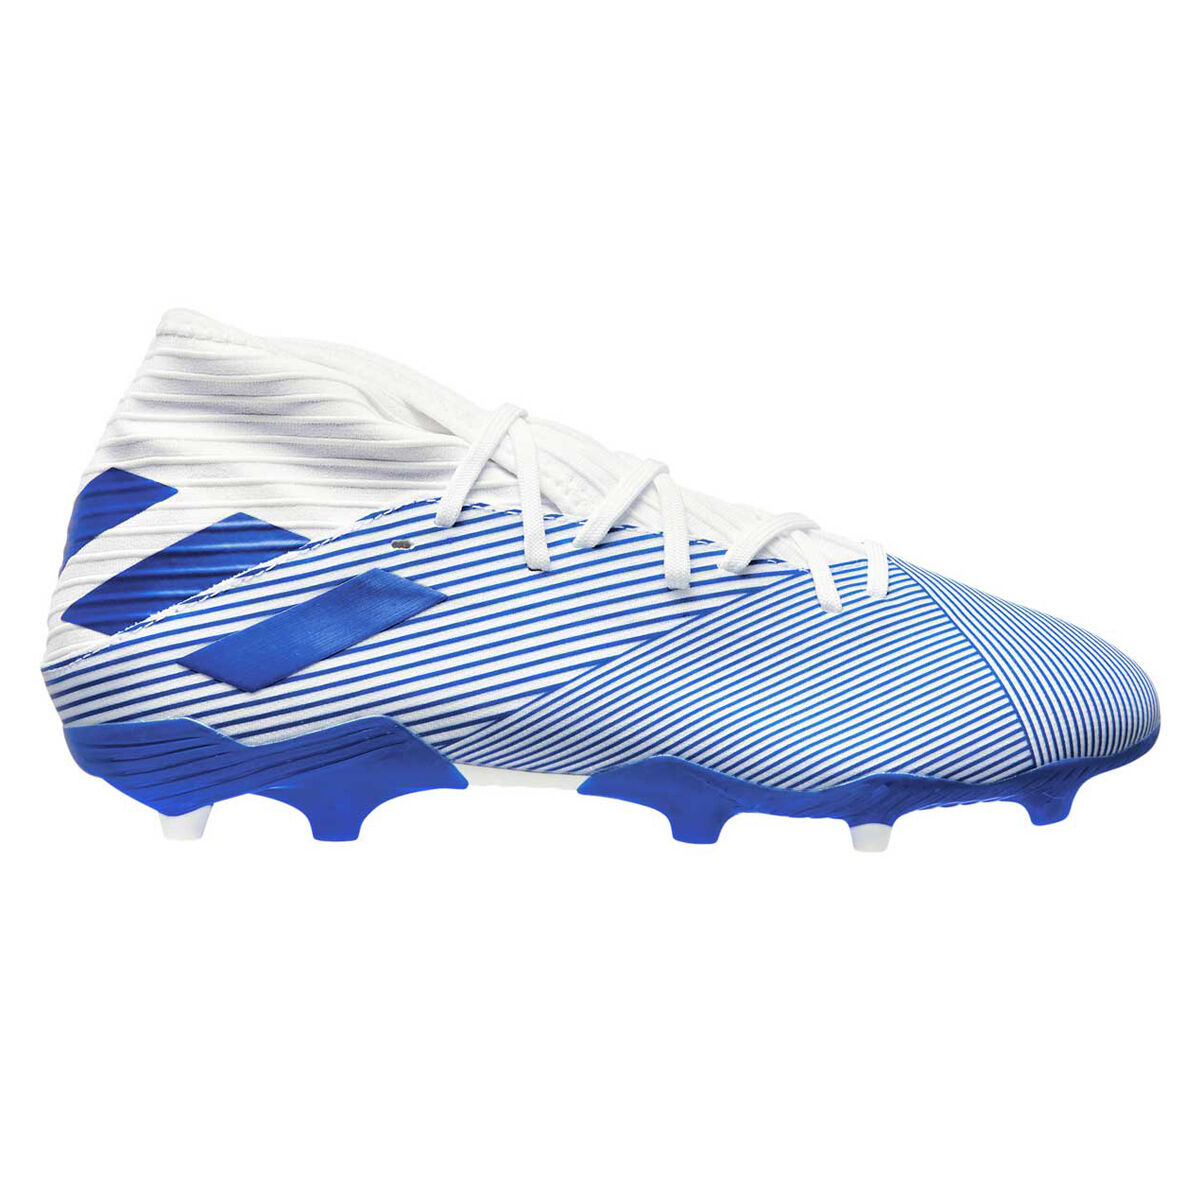 white and blue adidas football boots